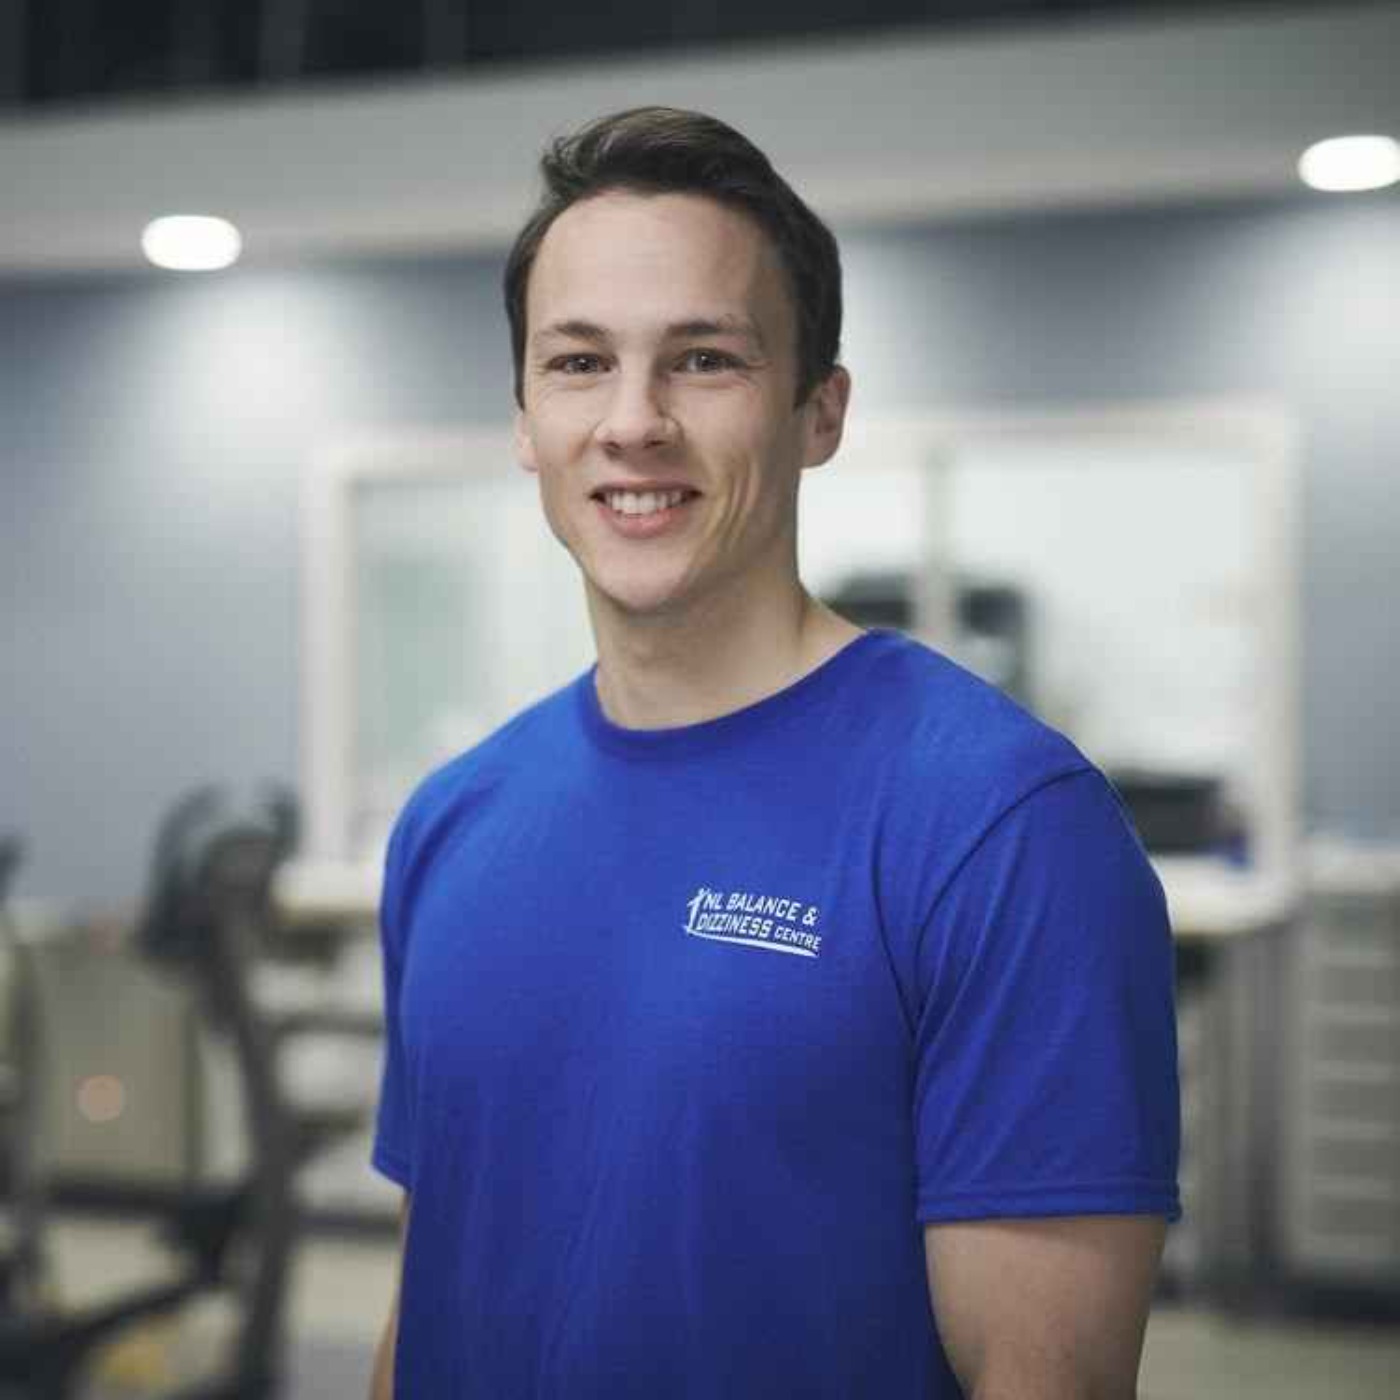 Physiotherapy, NL Balance & Dizziness Centre with Jake Warren